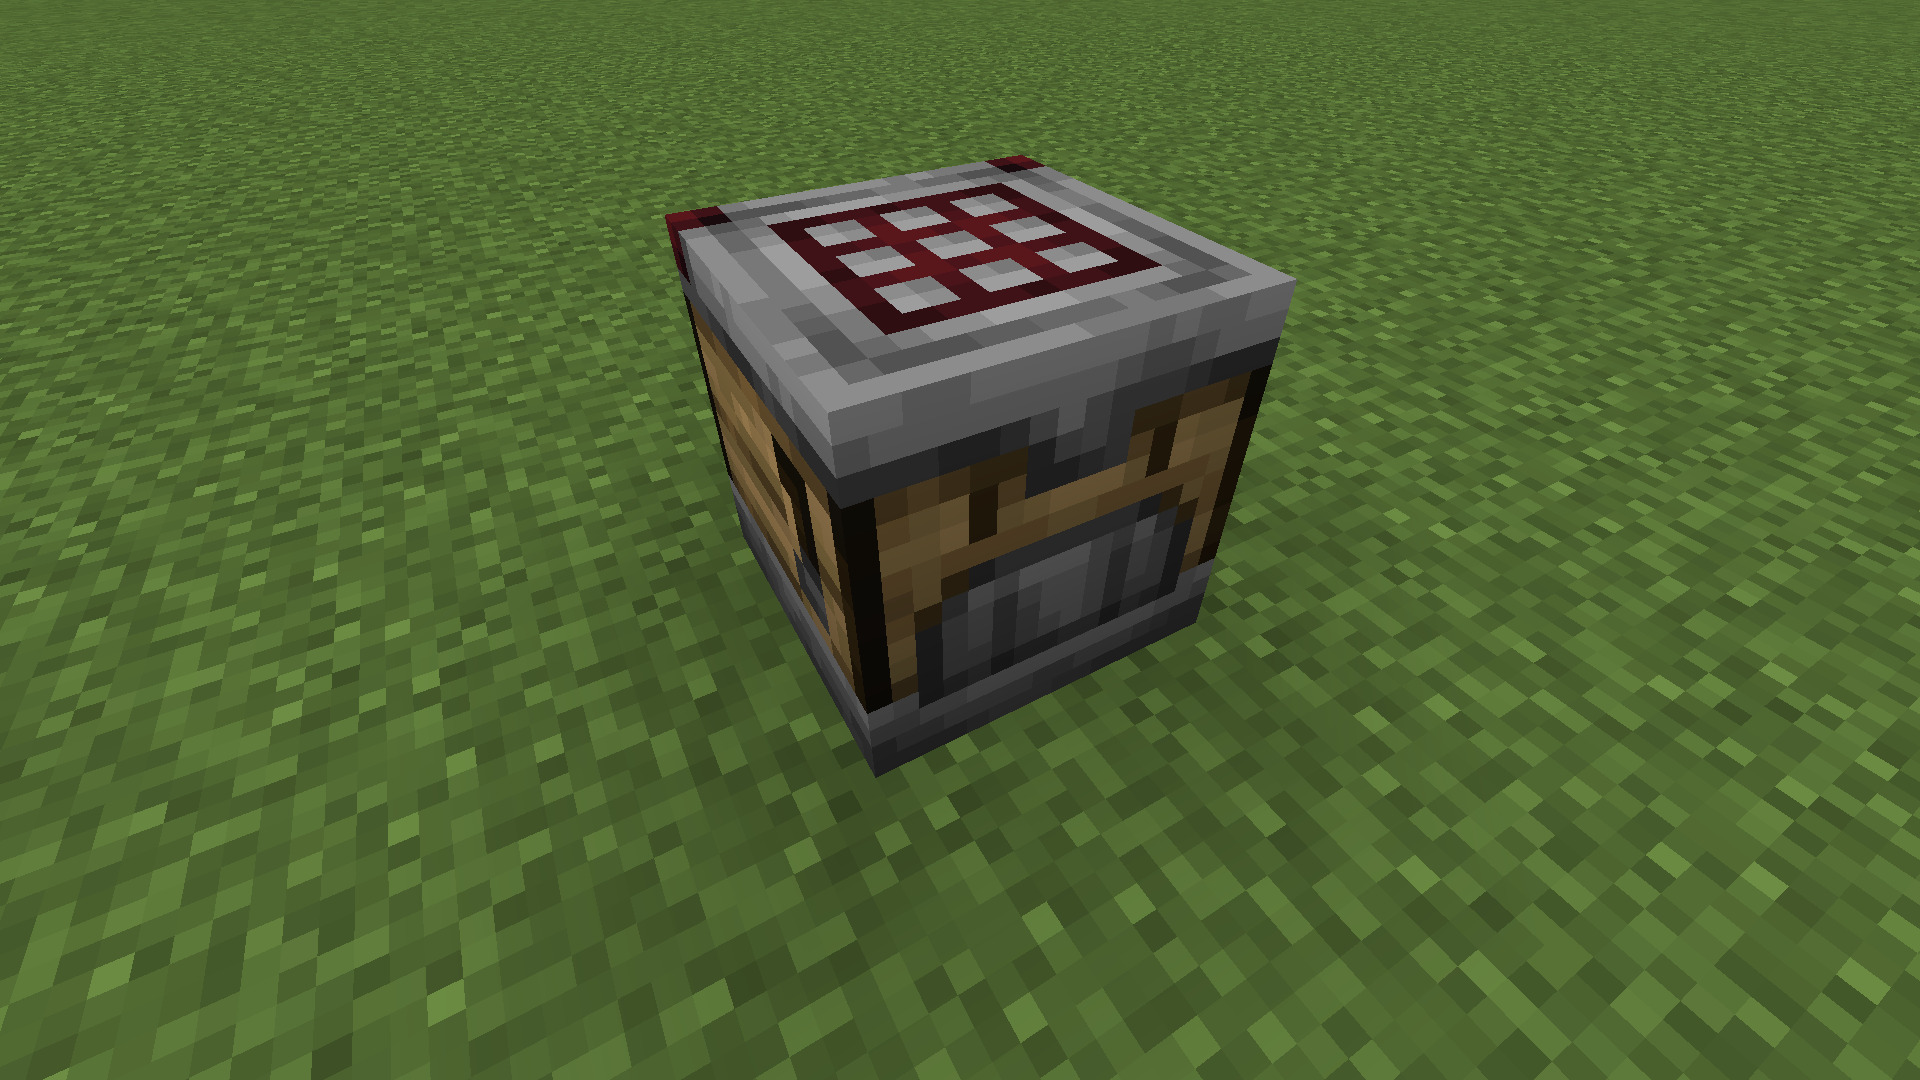 The Crafter block is amazing!(the new block that allows automatic